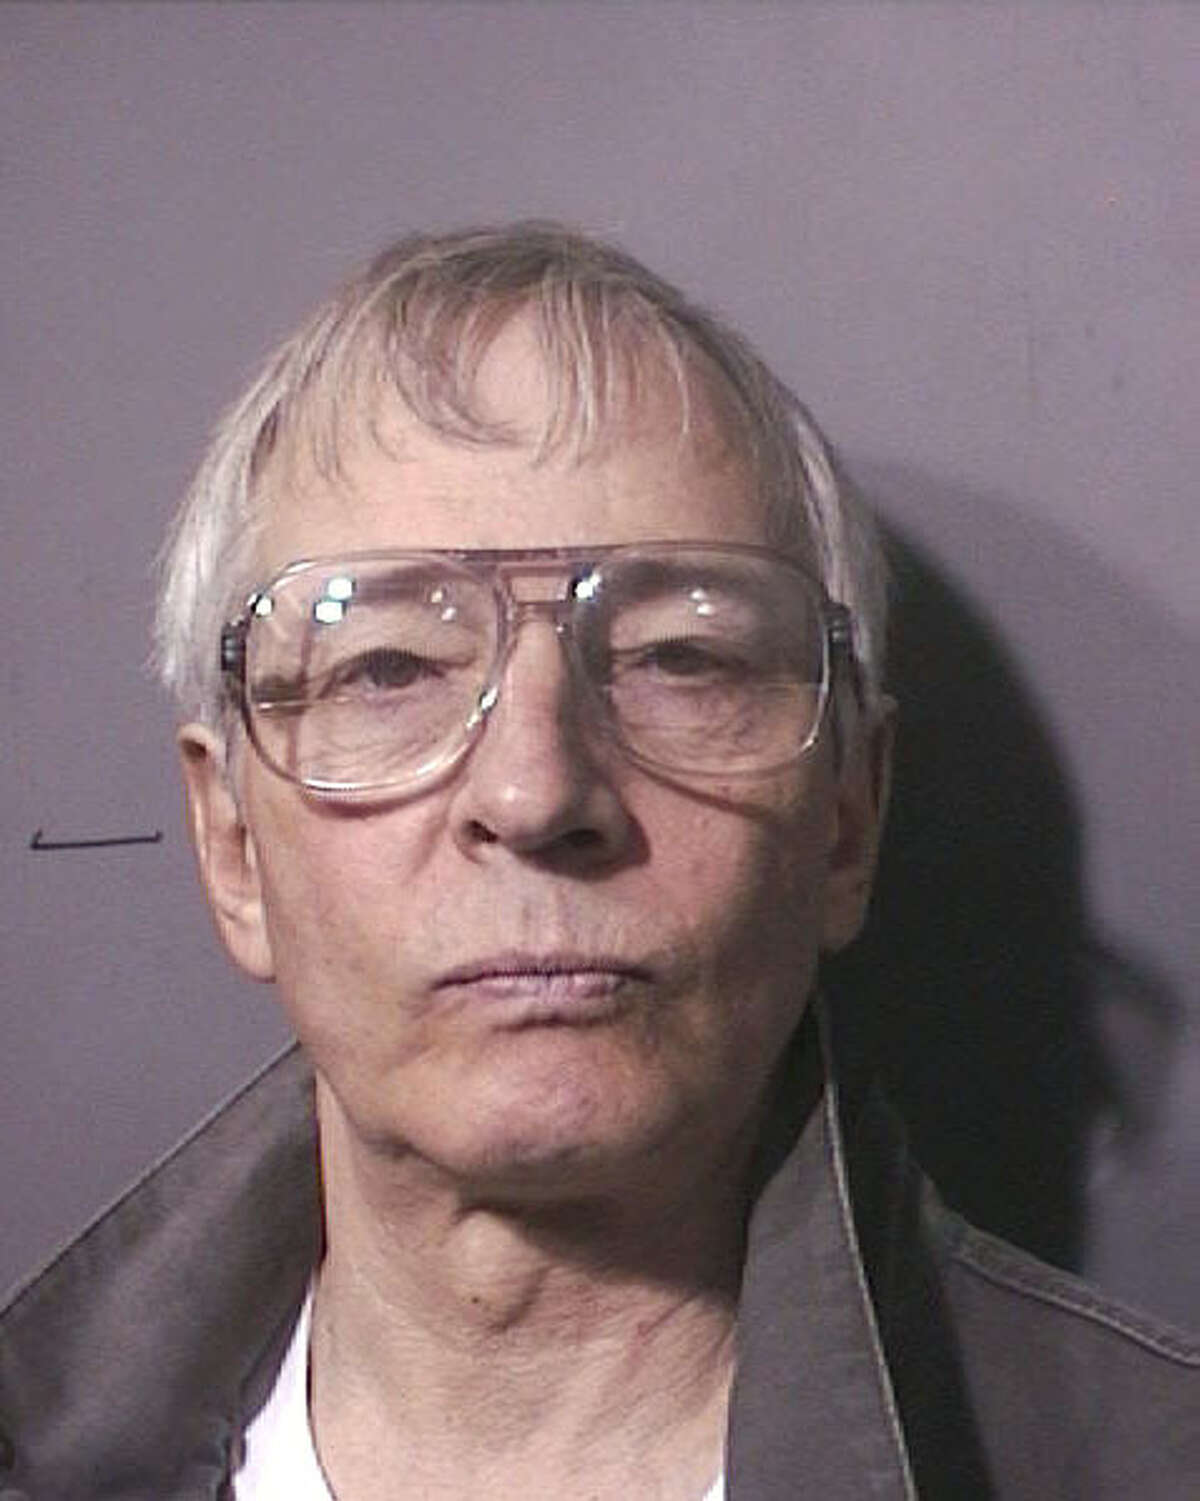 Robert Durst booking photo courtesy Harris County Sheriff's Office emailed photo HOUCHRON CAPTION (12/21/2005) SECNEWS: DURST